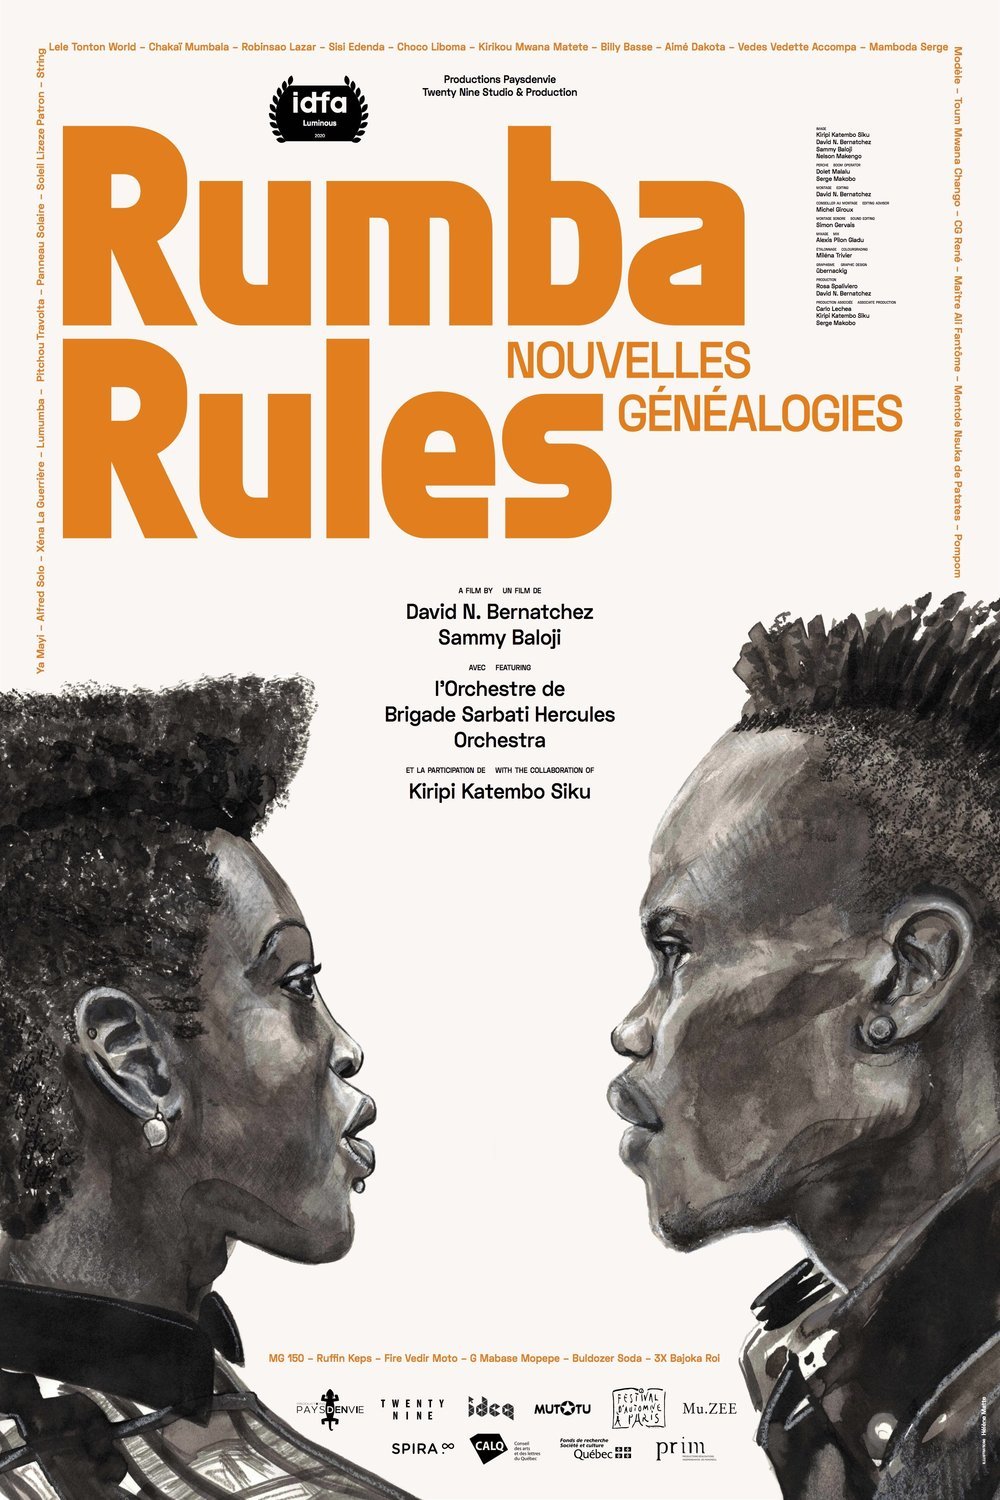 Lingala poster of the movie Rumba Rules, New Genealogies